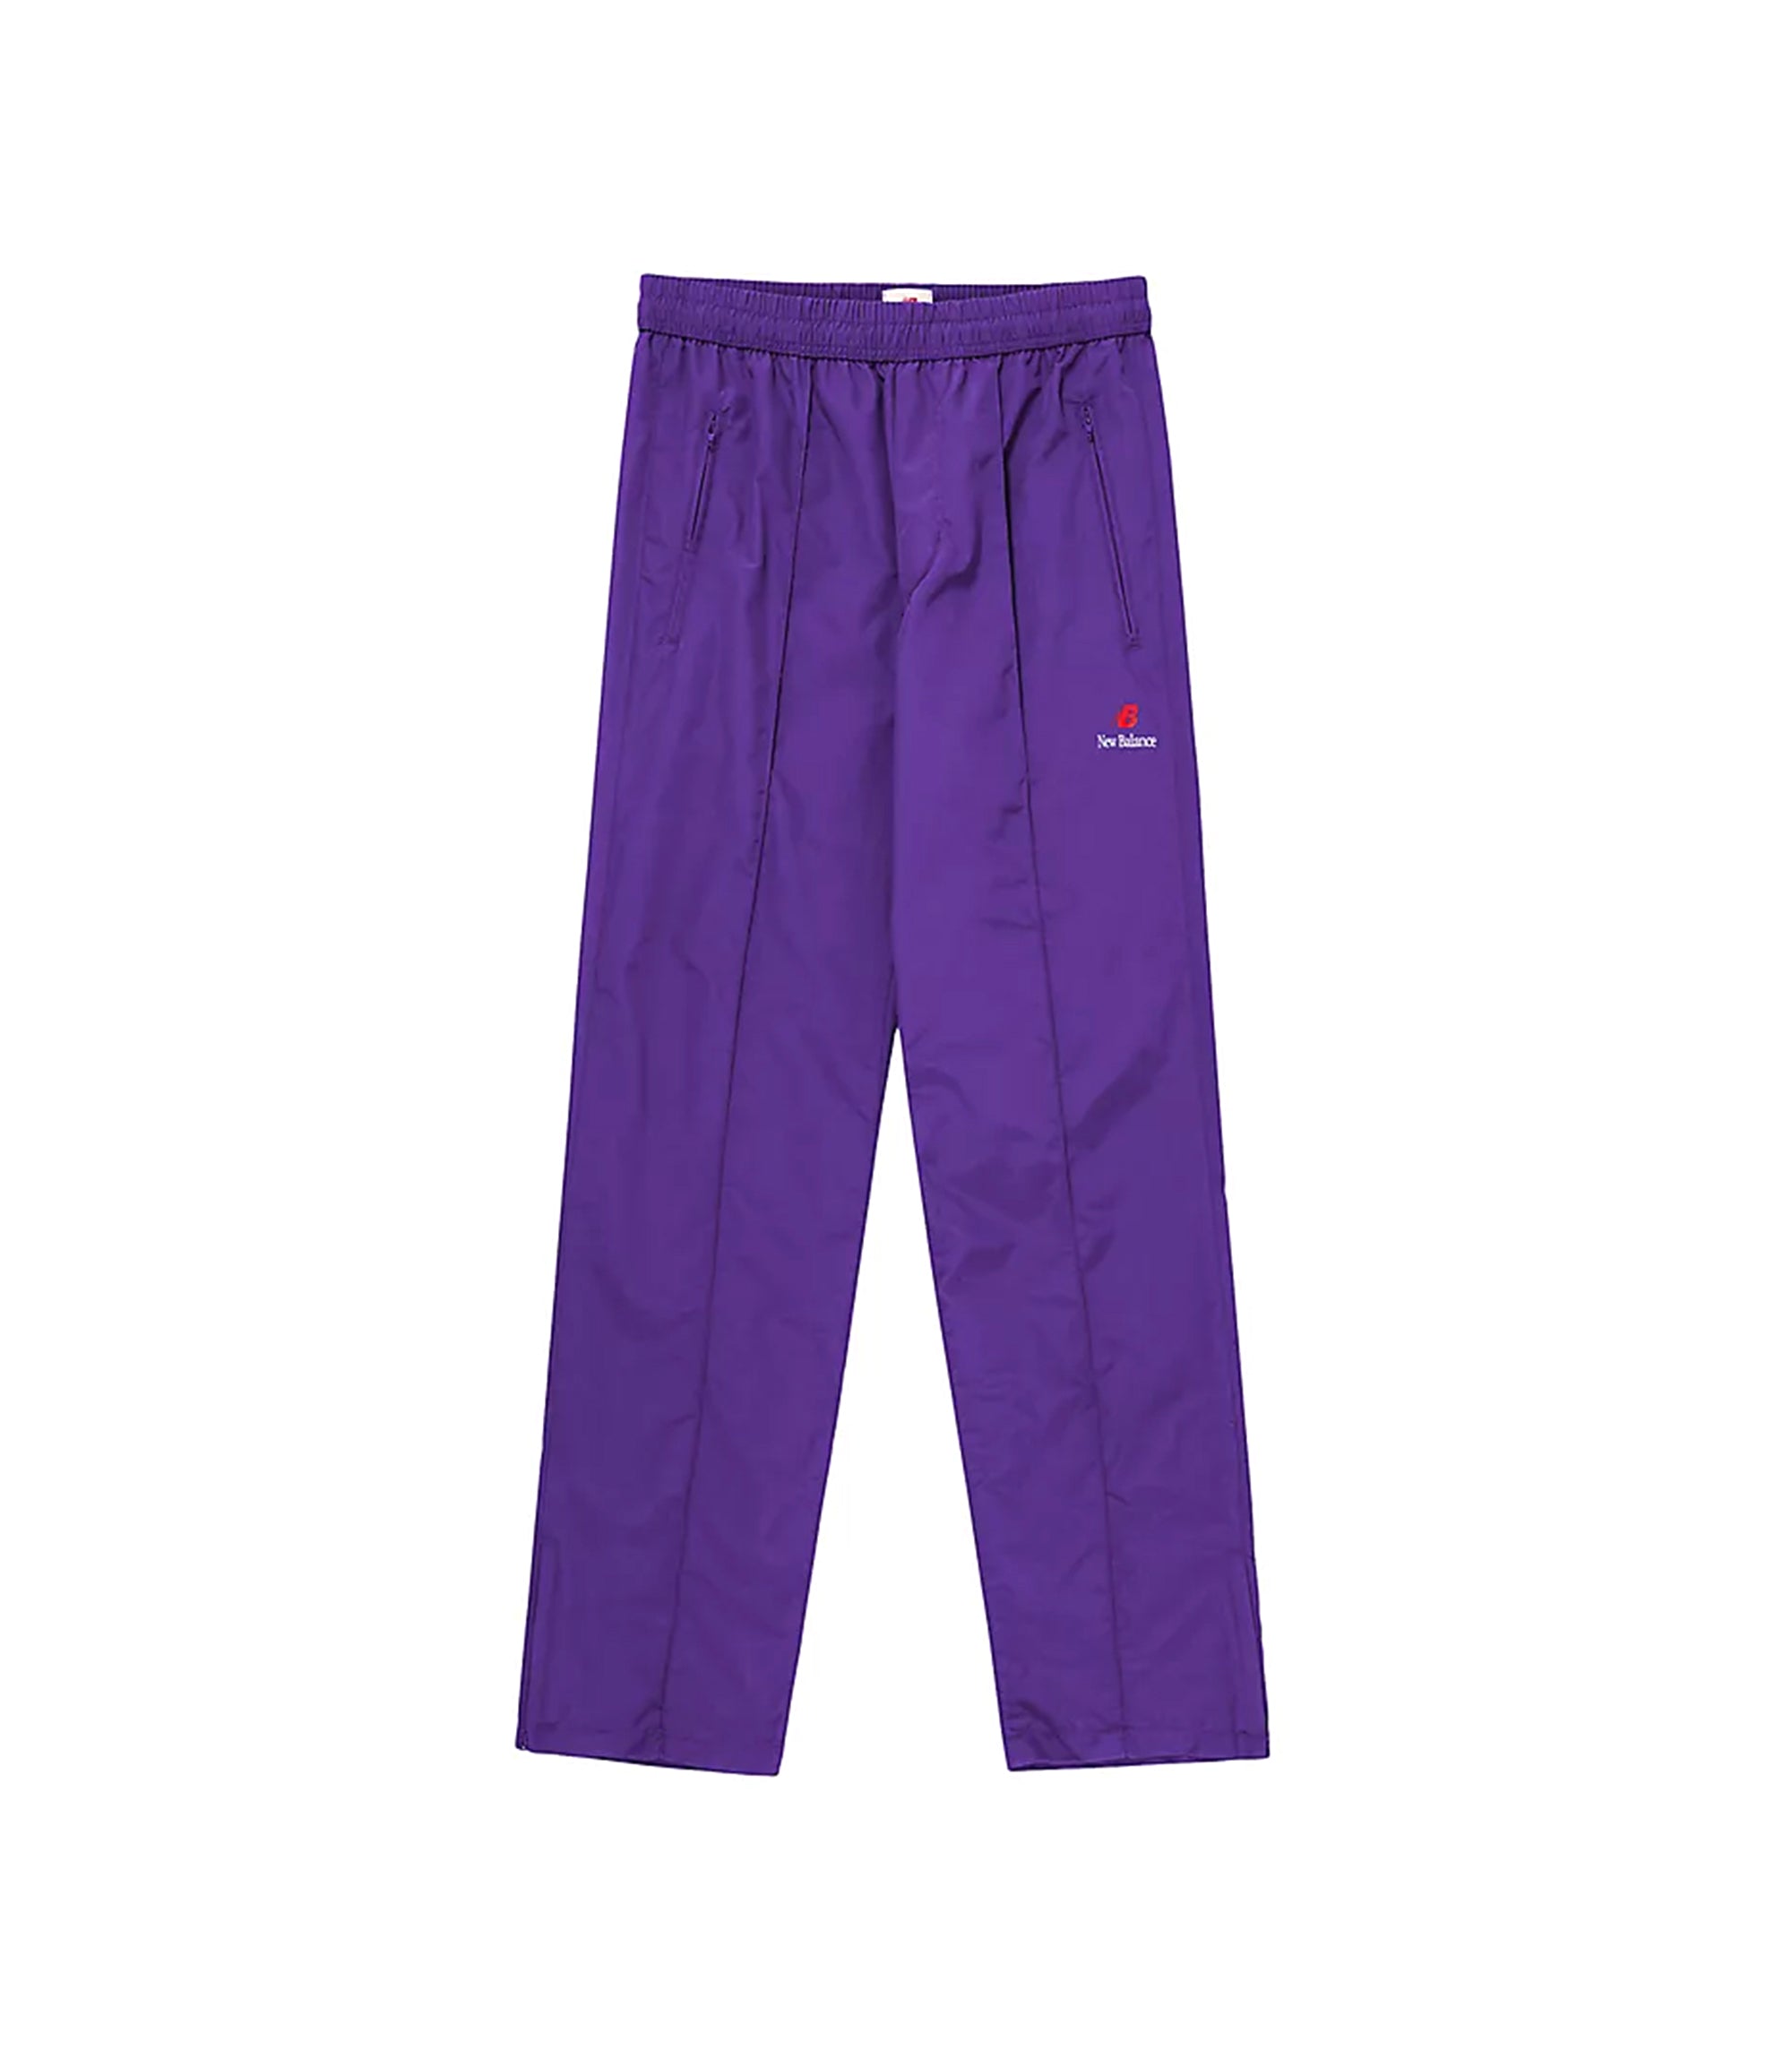 Made in USA Woven Pants - Prism Purple